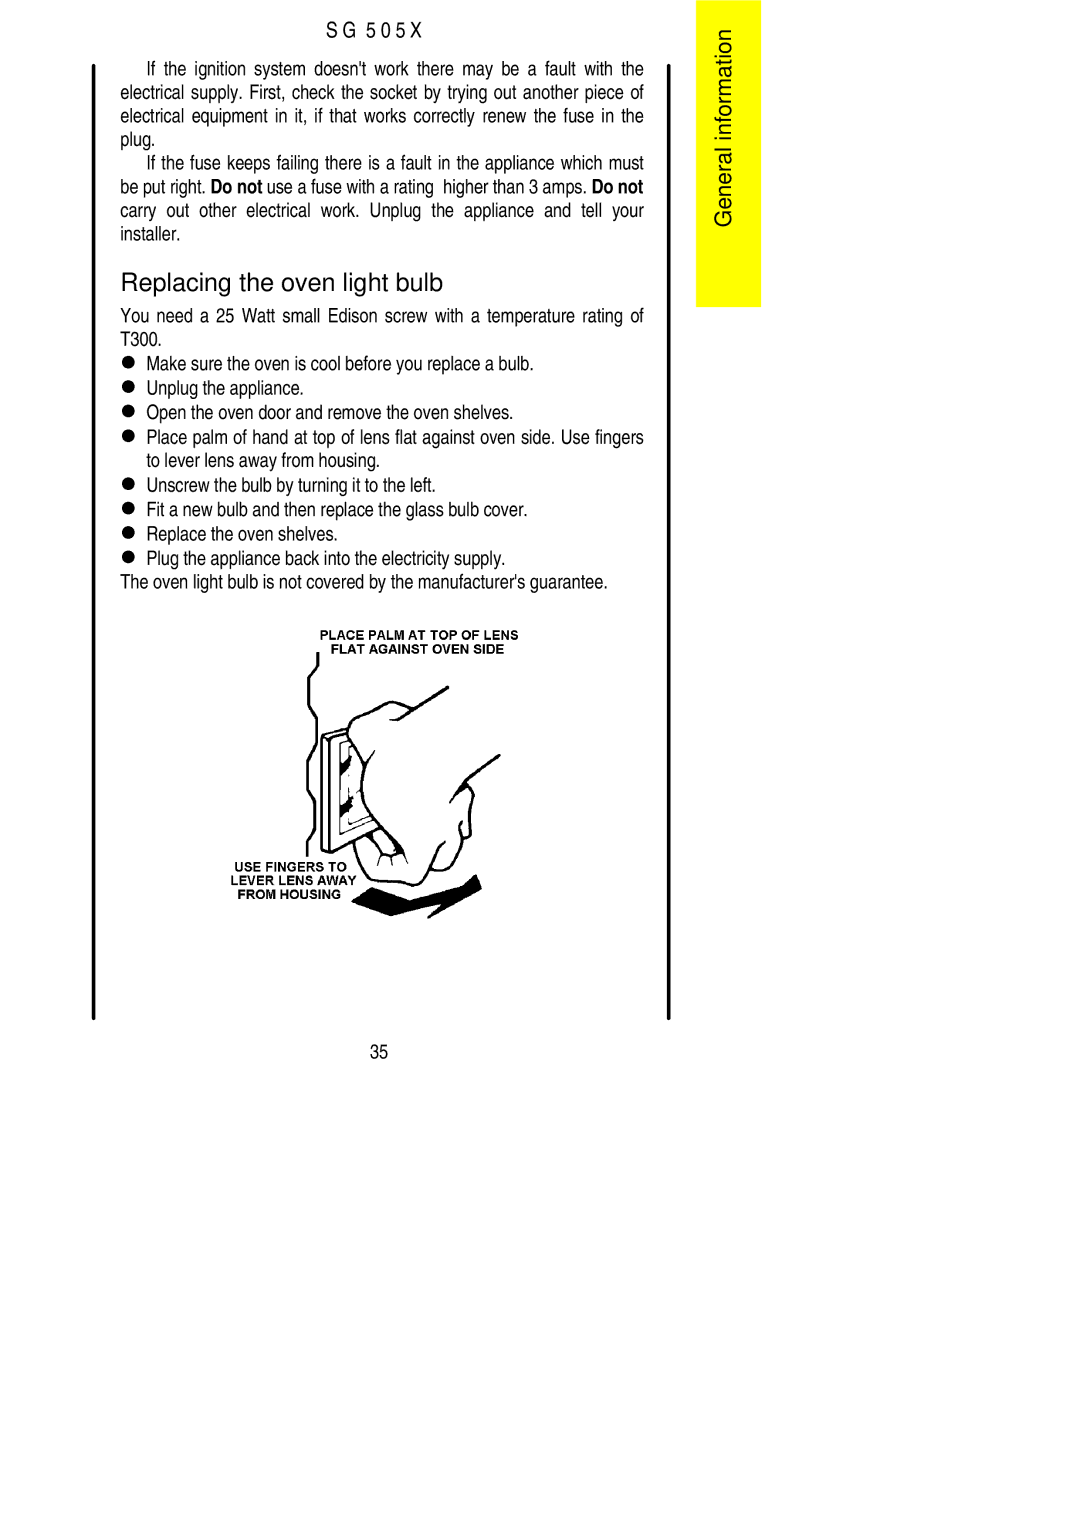 Electrolux SG 505X installation instructions Replacing the oven light bulb 